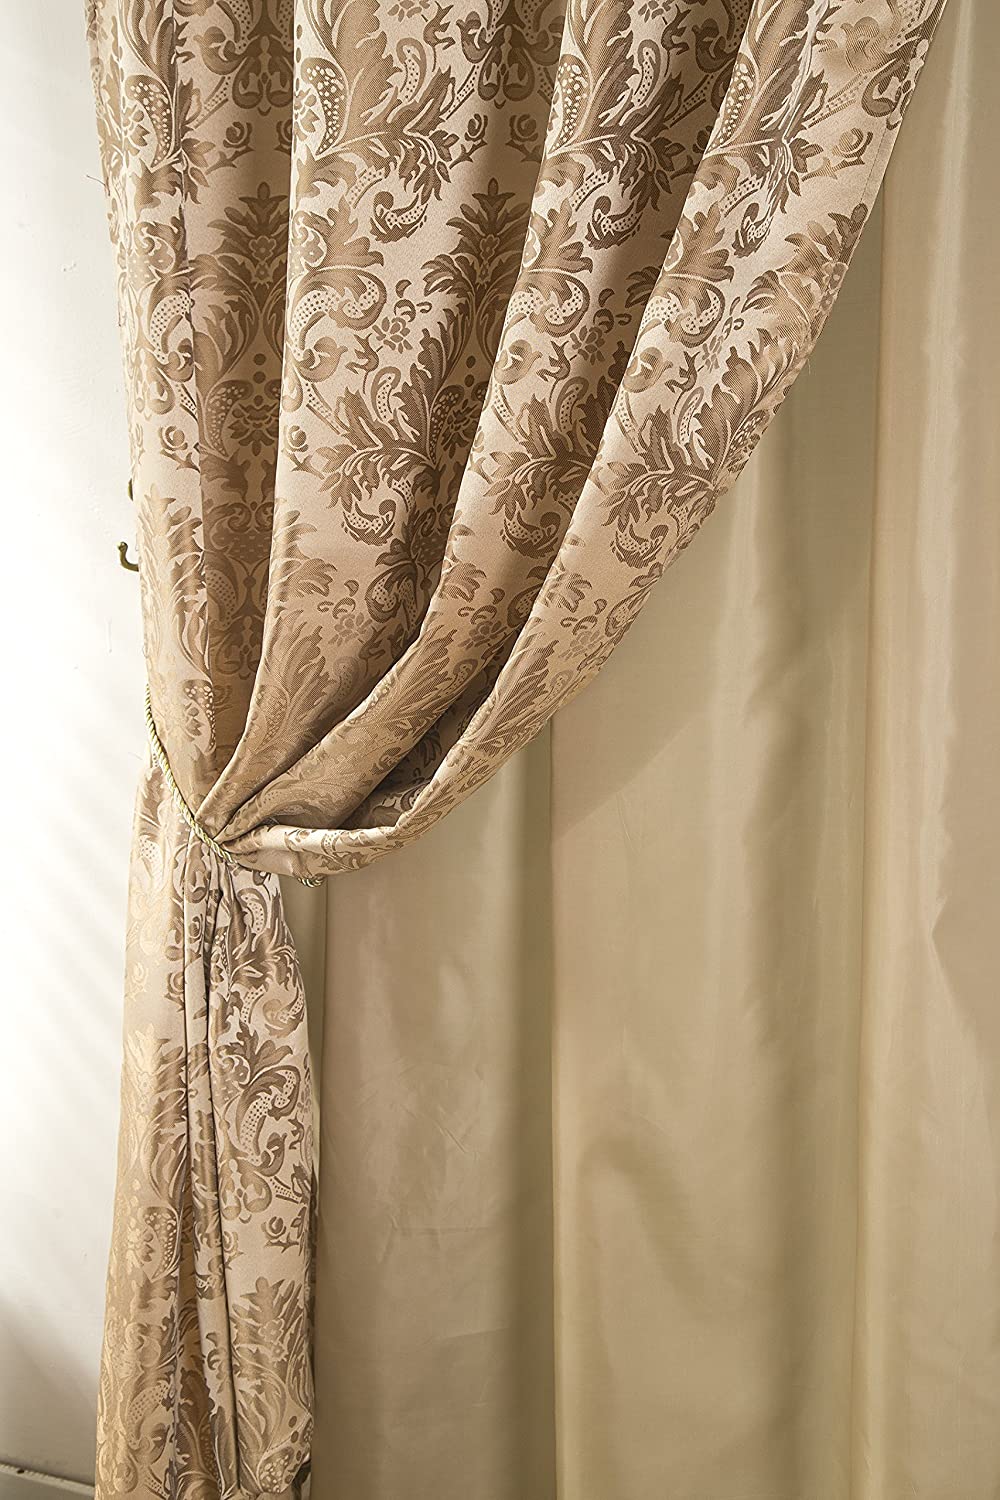 Sparta Damask Textured Jacquard 54 x 84 in. Rod Pocket Curtain Panel w/ Attached 18 in. Valance - Linen Universe Co.